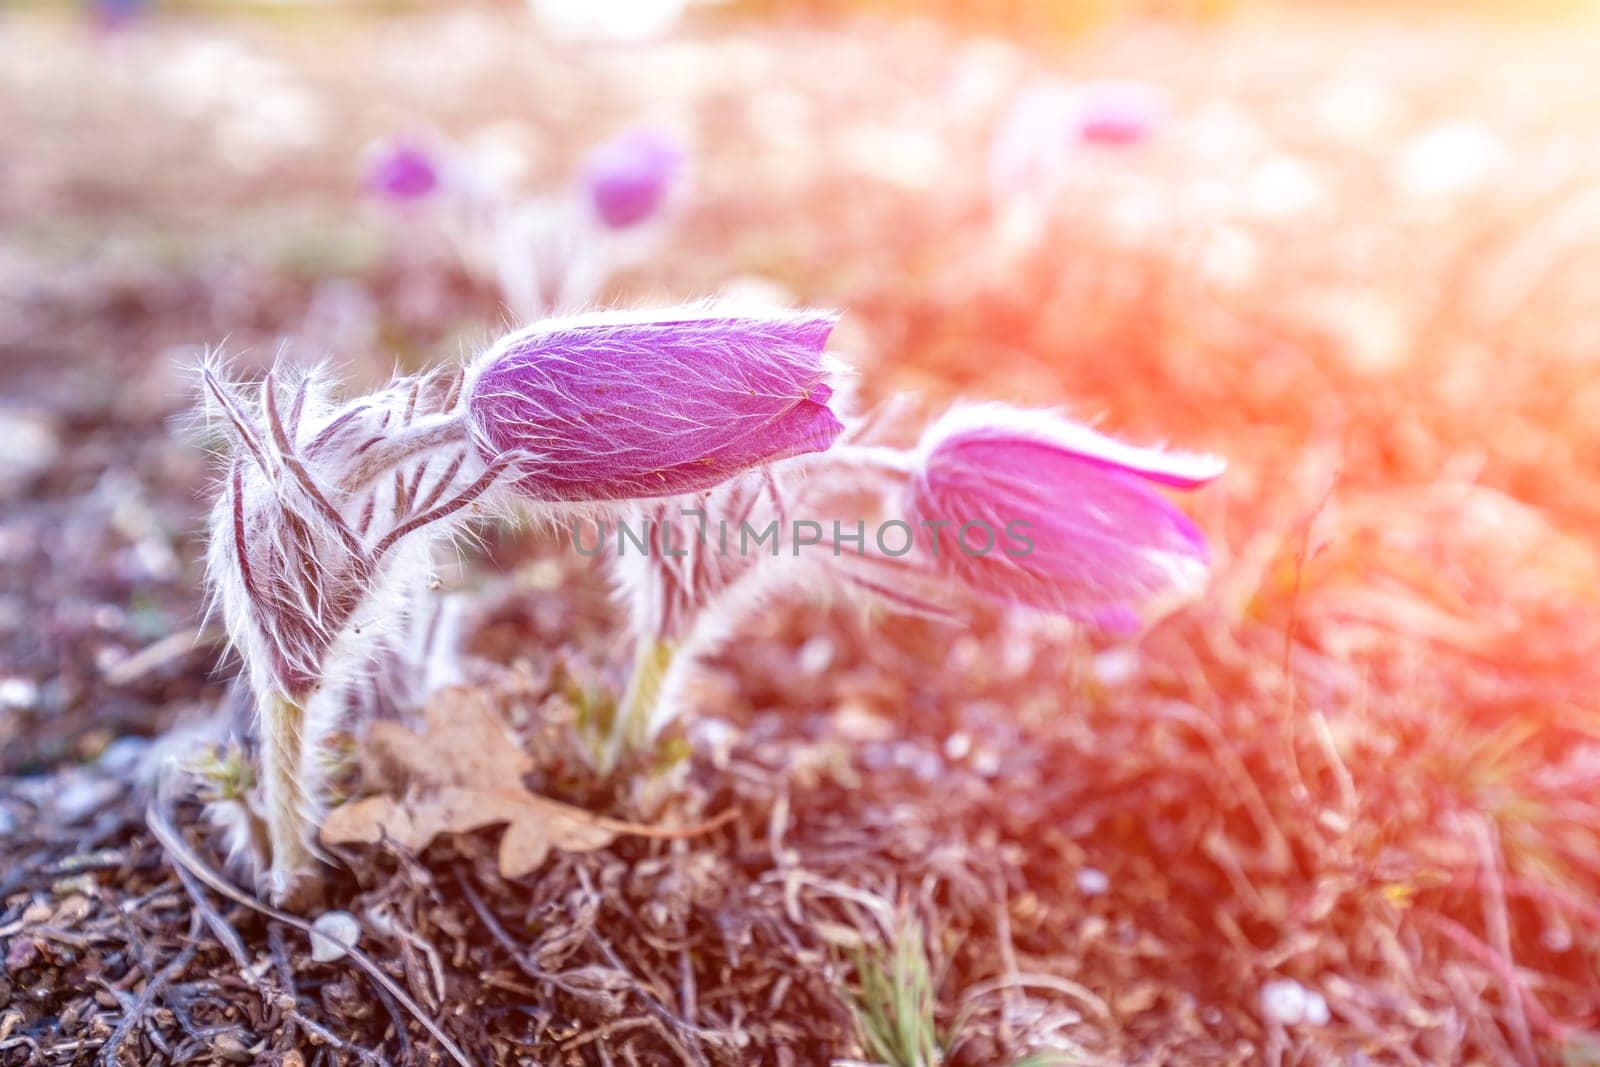 Dream grass is the most beautiful spring flower. Pulsatilla blooms in early spring in forests and mountains. Purple pulsatilla flowers close up in the snow.